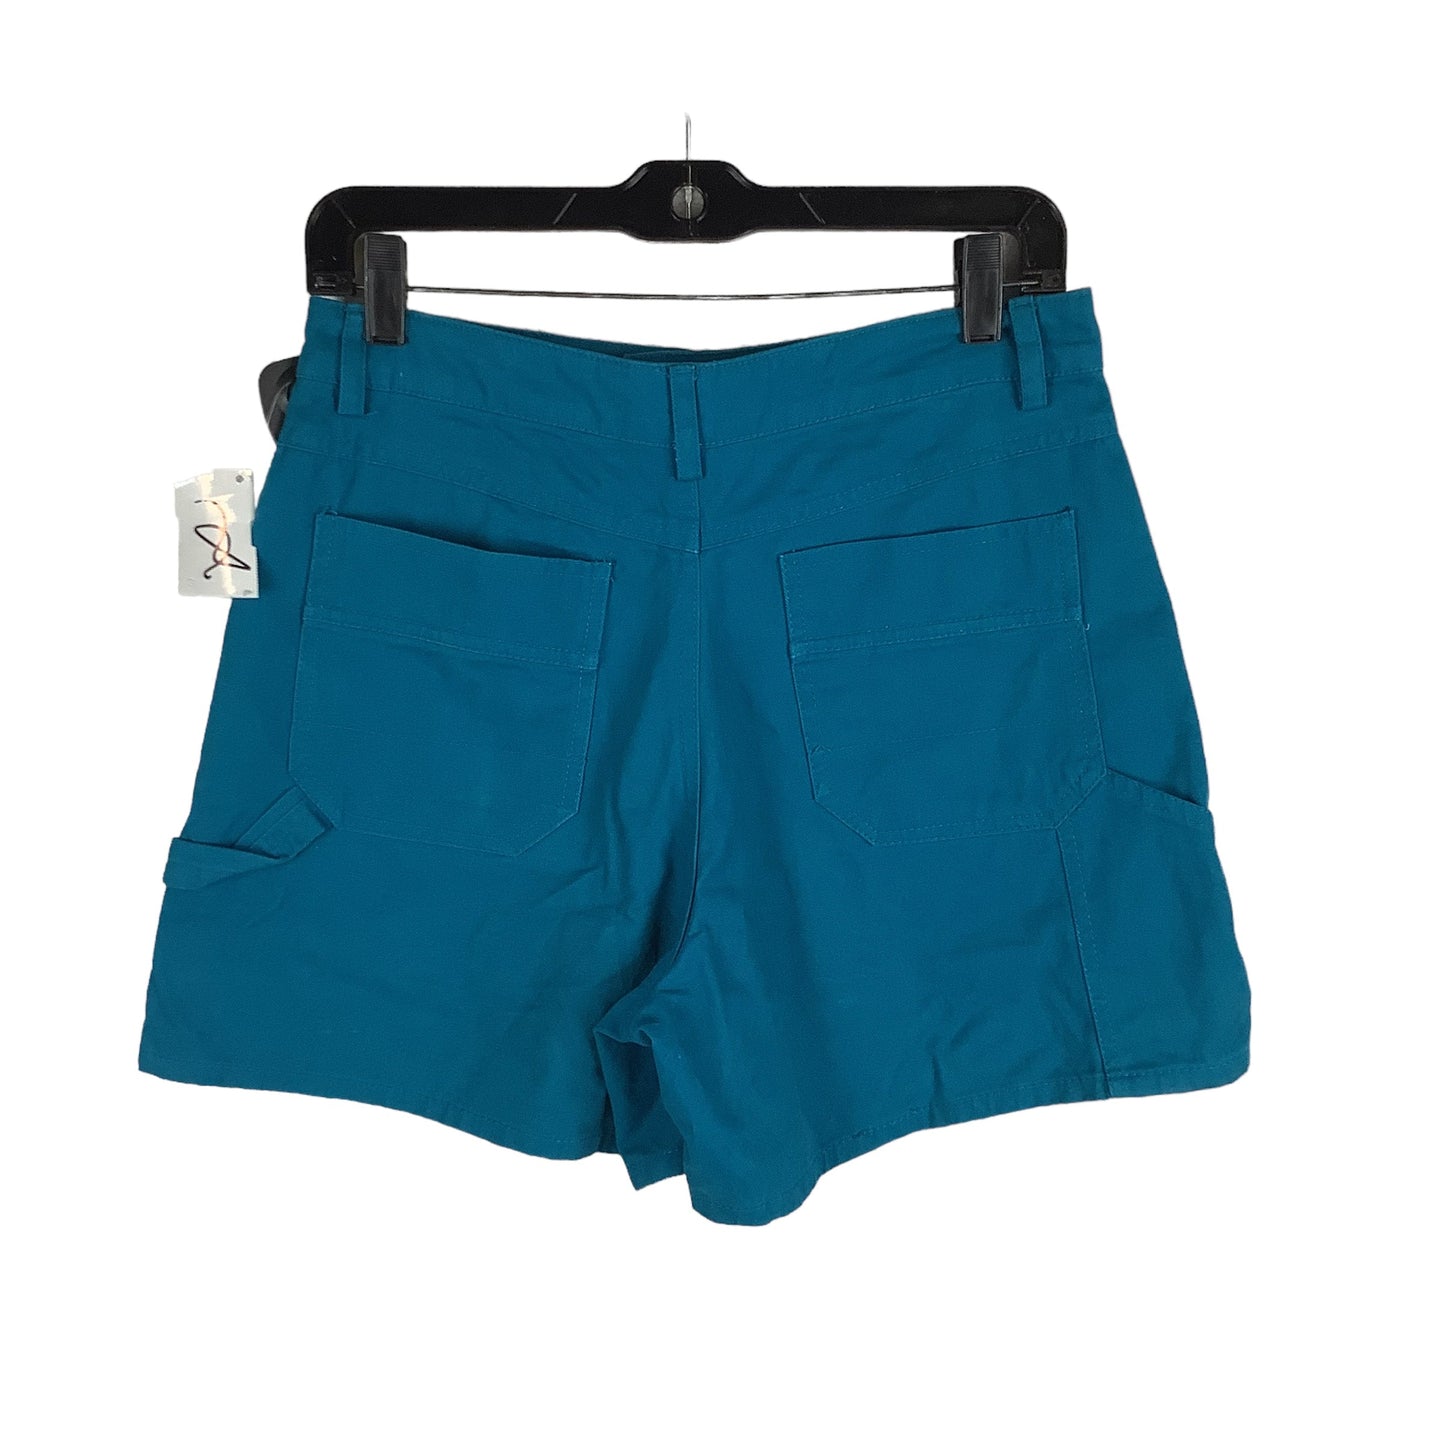 Blue Shorts Forever 21, Size M